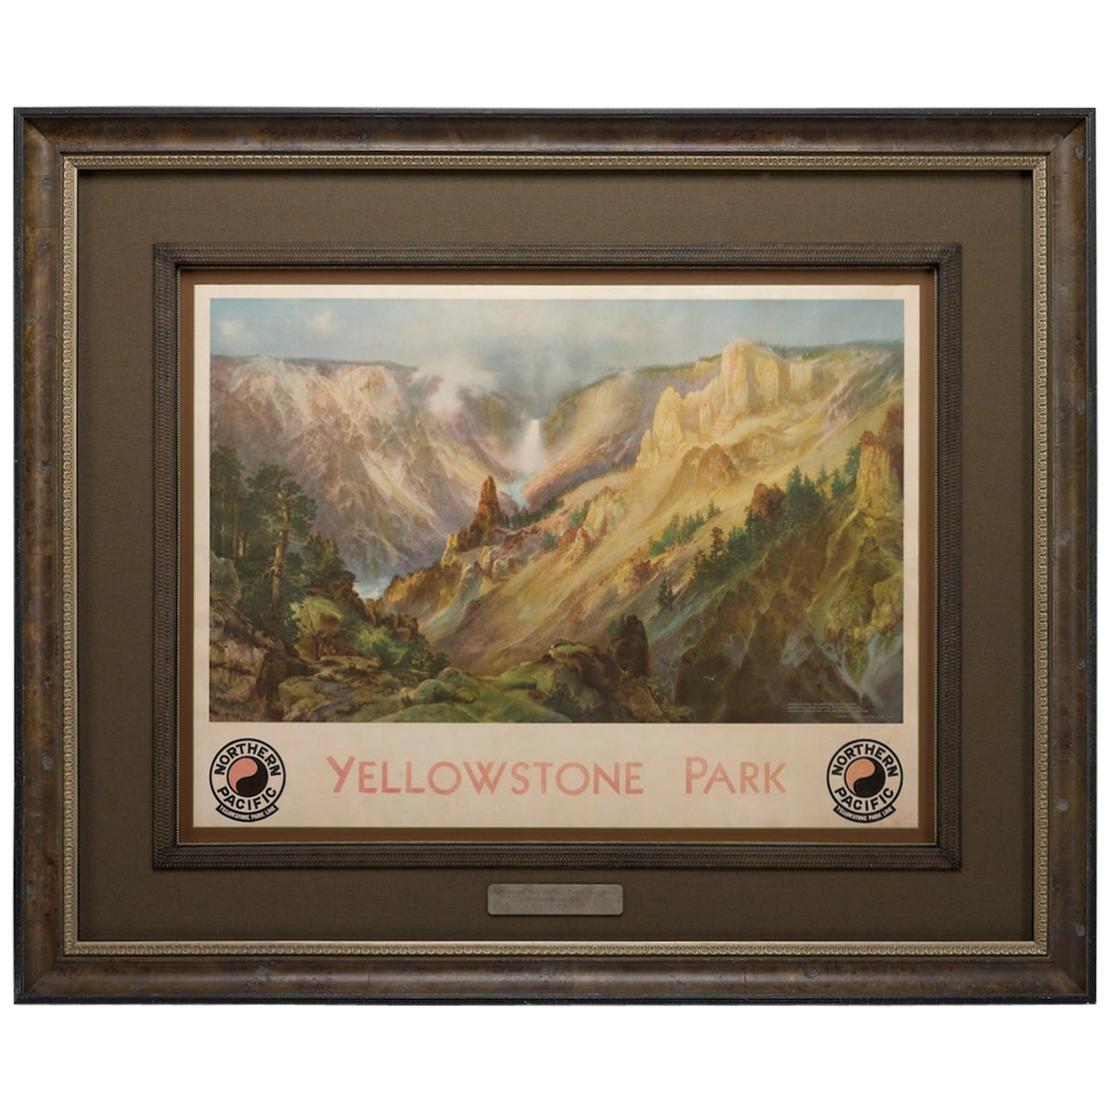 Northern Pacific Railroad Poster, "Yellowstone Park" after Thomas Moran, 1924 For Sale